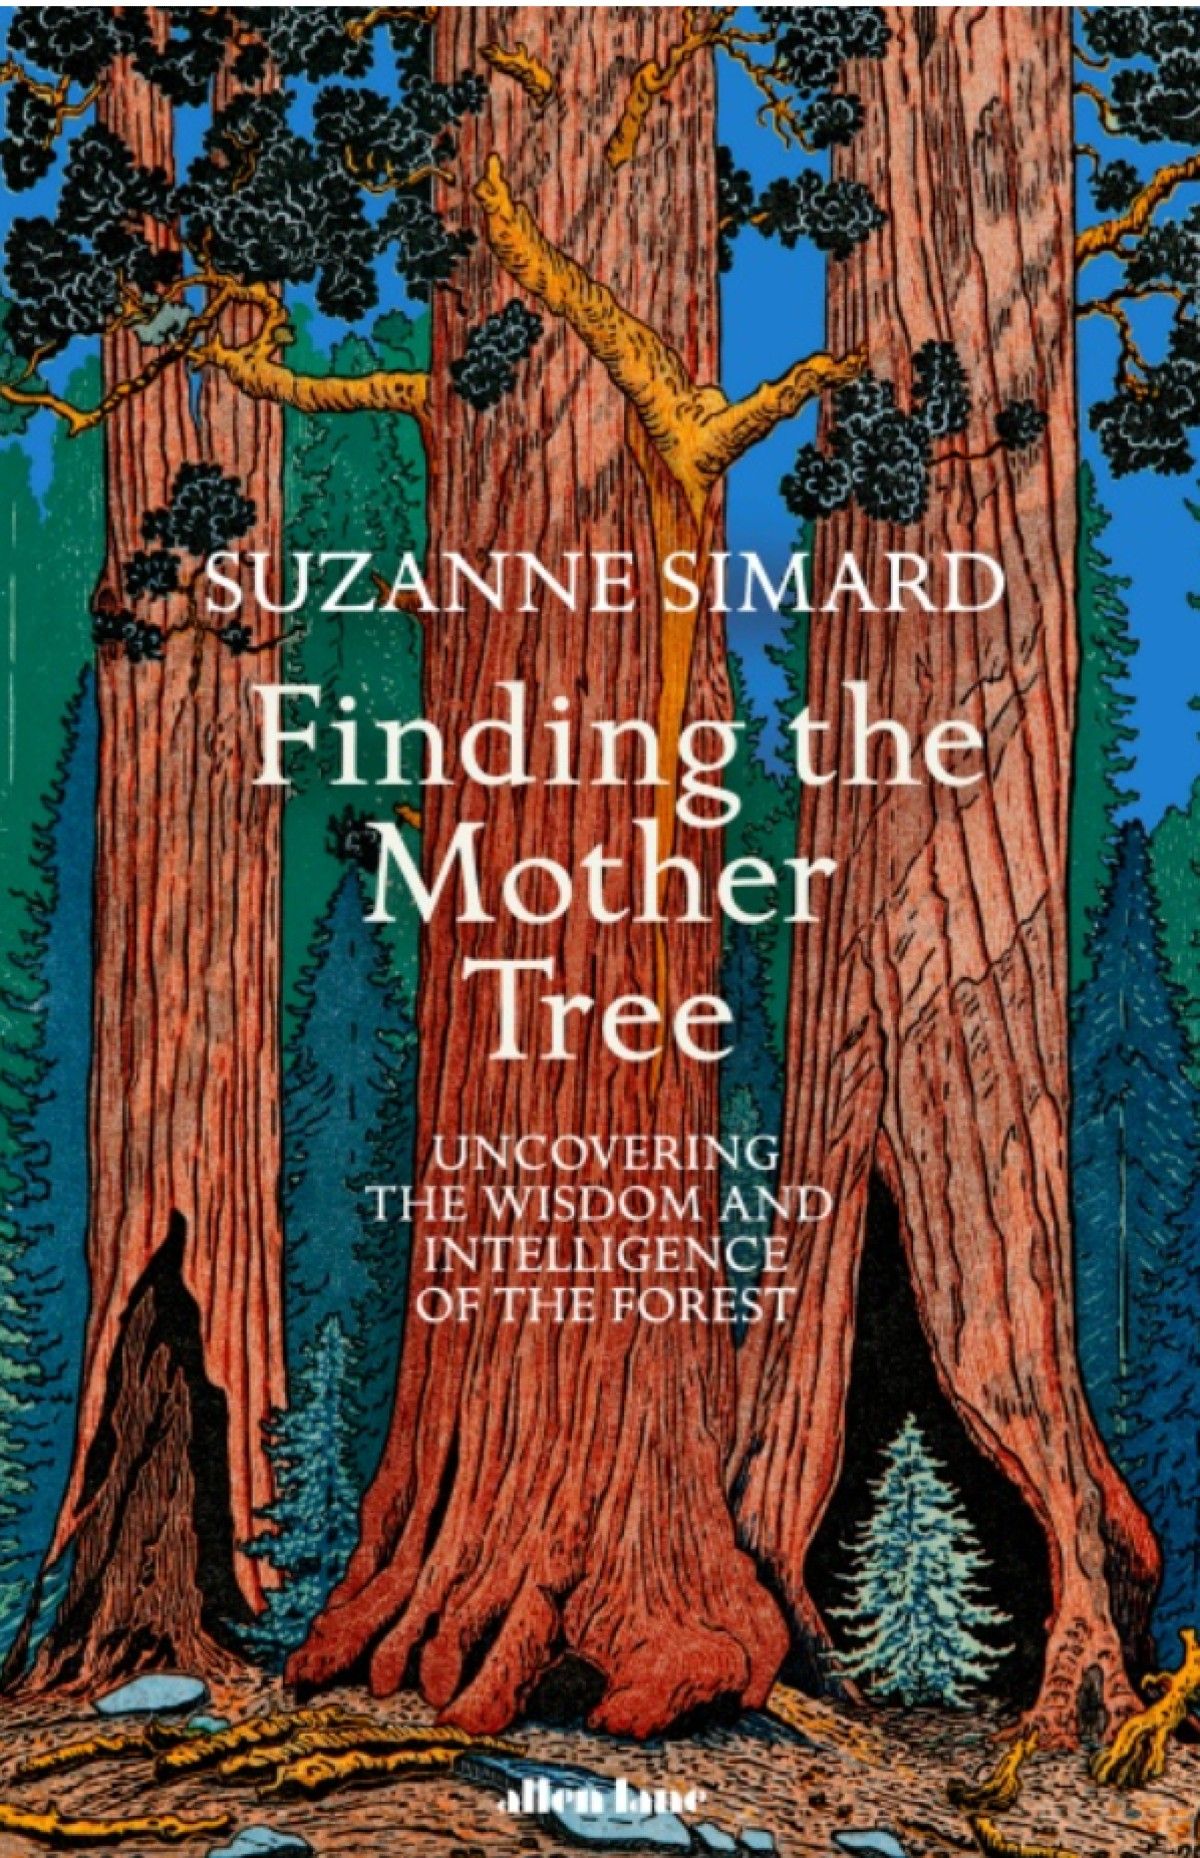 finding-the-mother-tree-book-cover-suzanne-simard